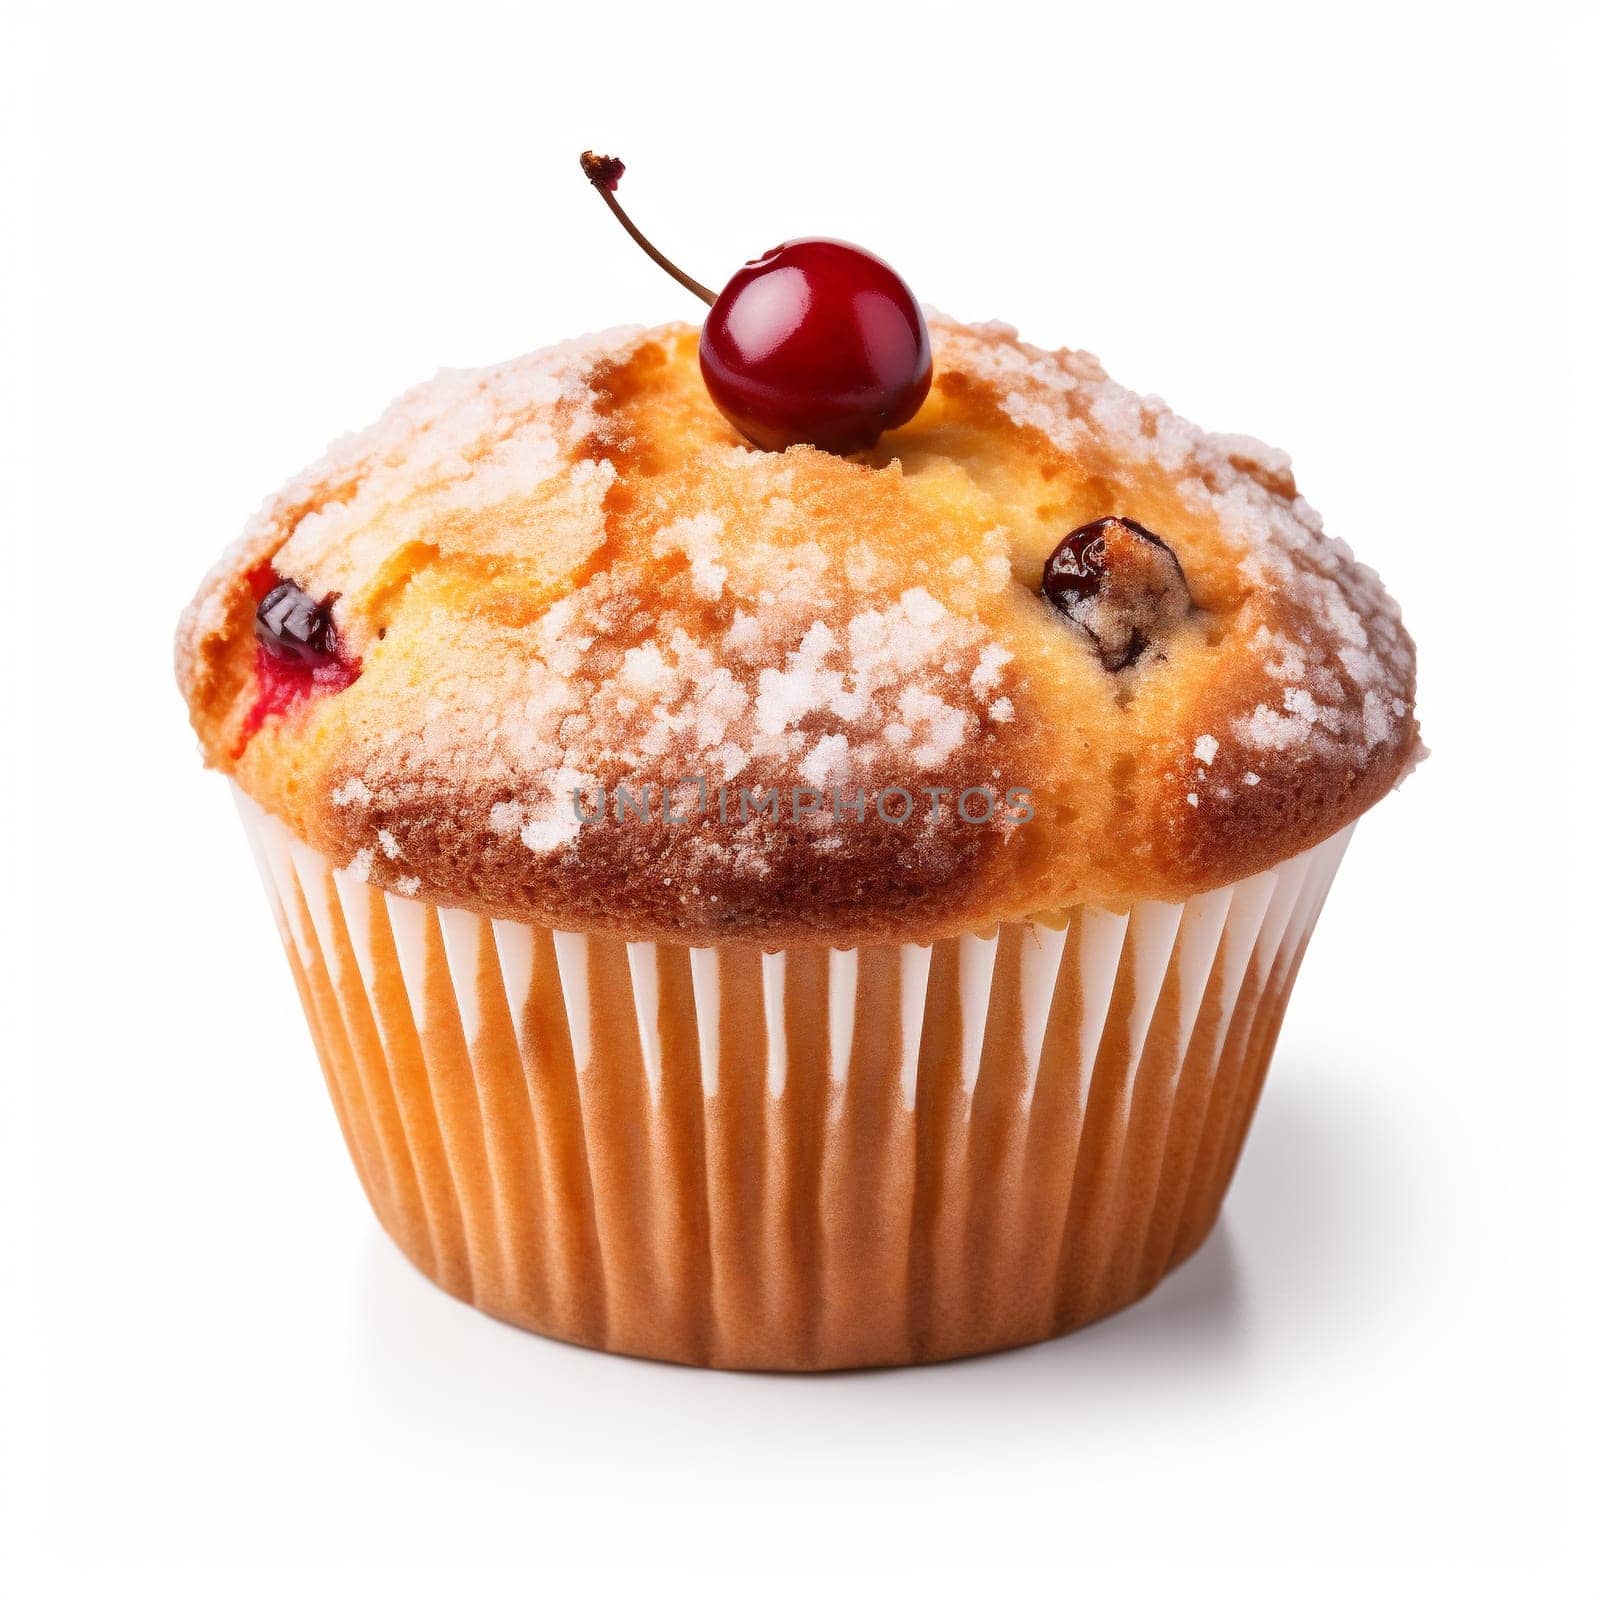 Fresh Baked Single Muffin Isolated on White Background. Muffin with Chocolate Chip and Cherry in a Paper Muffin Cup.